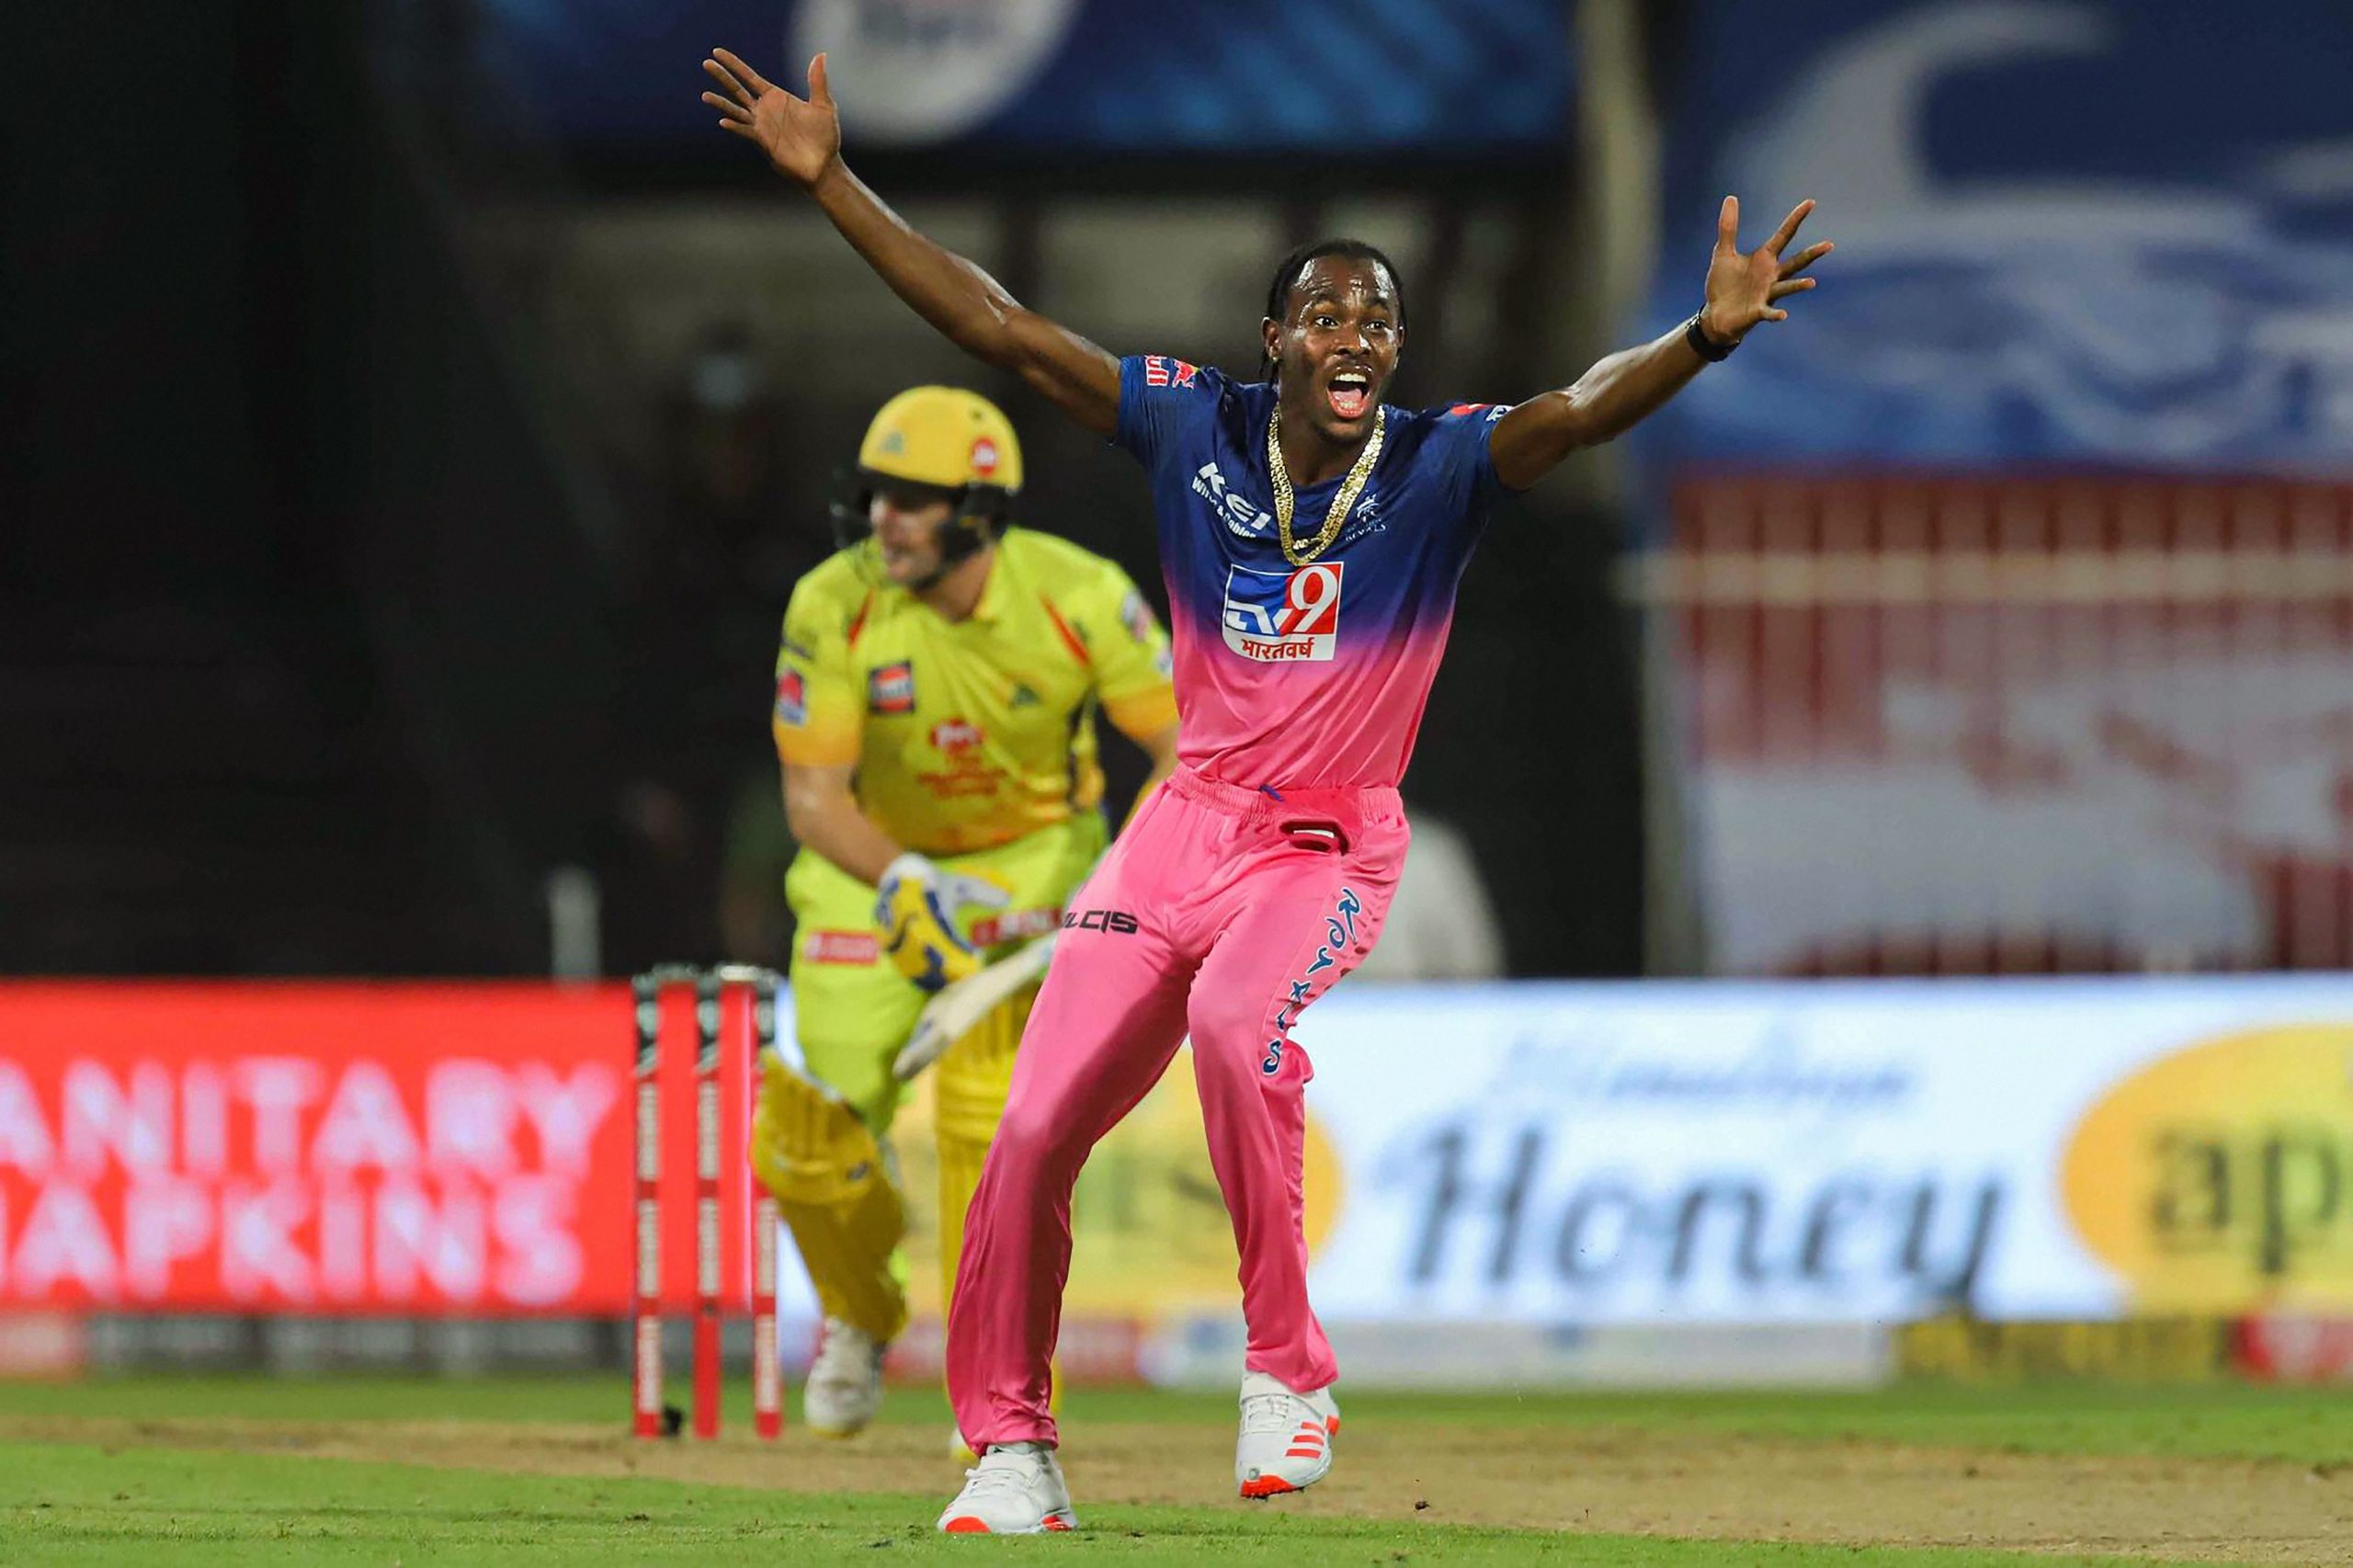 Rajasthan Royals’ Jofra Archer likely to miss IPL 2021 due to elbow injury